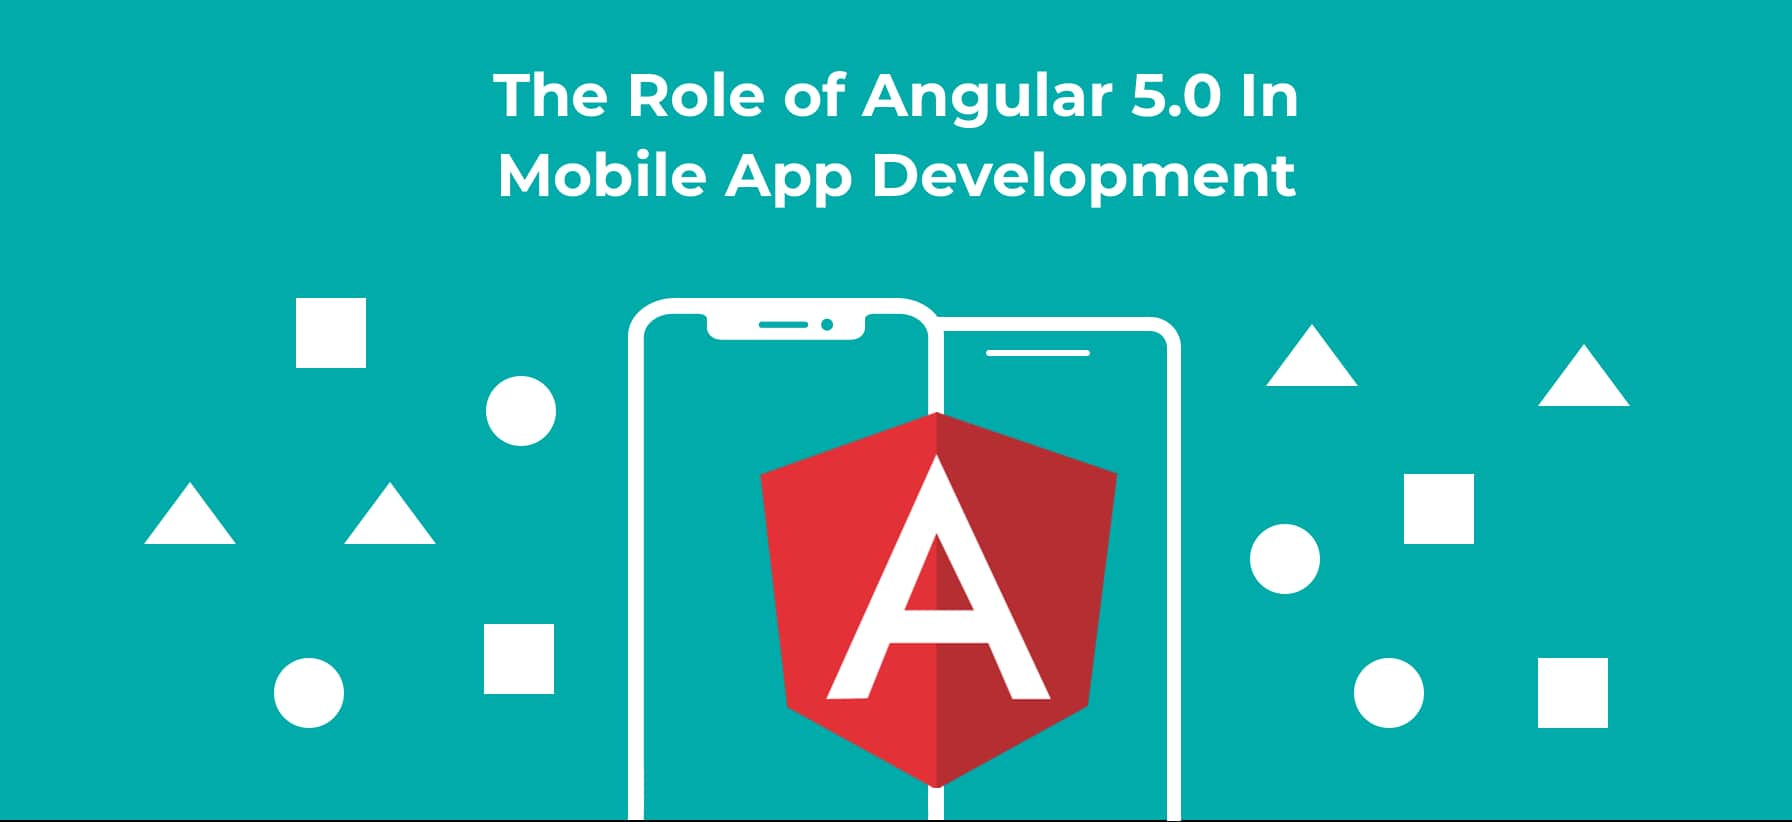 The Role of Angular 5.0 in Mobile App Development